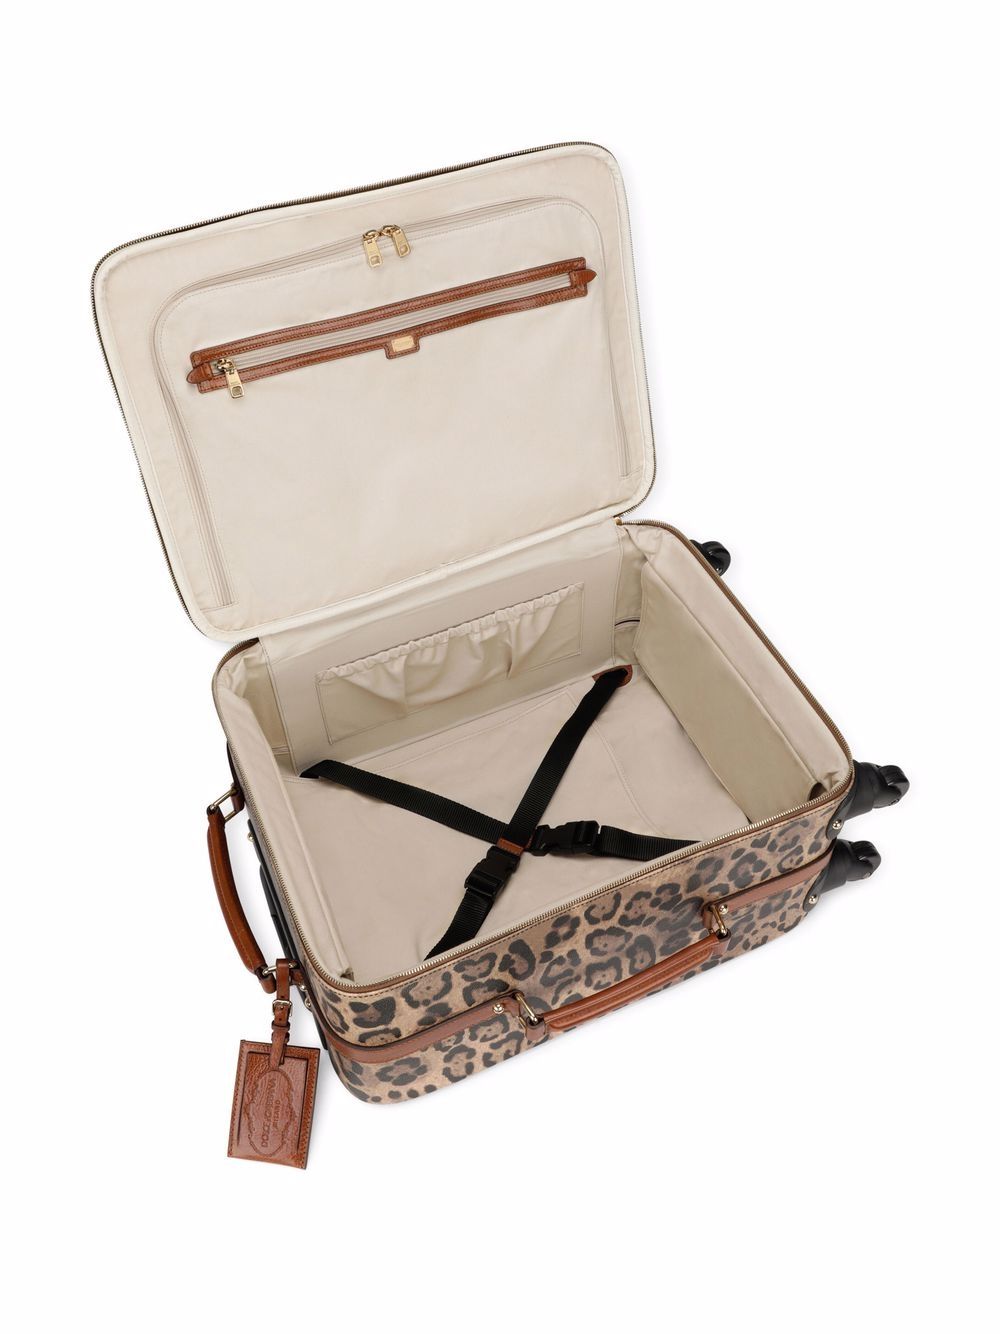 Medium travel bag in leopard-print Crespo with branded plate in